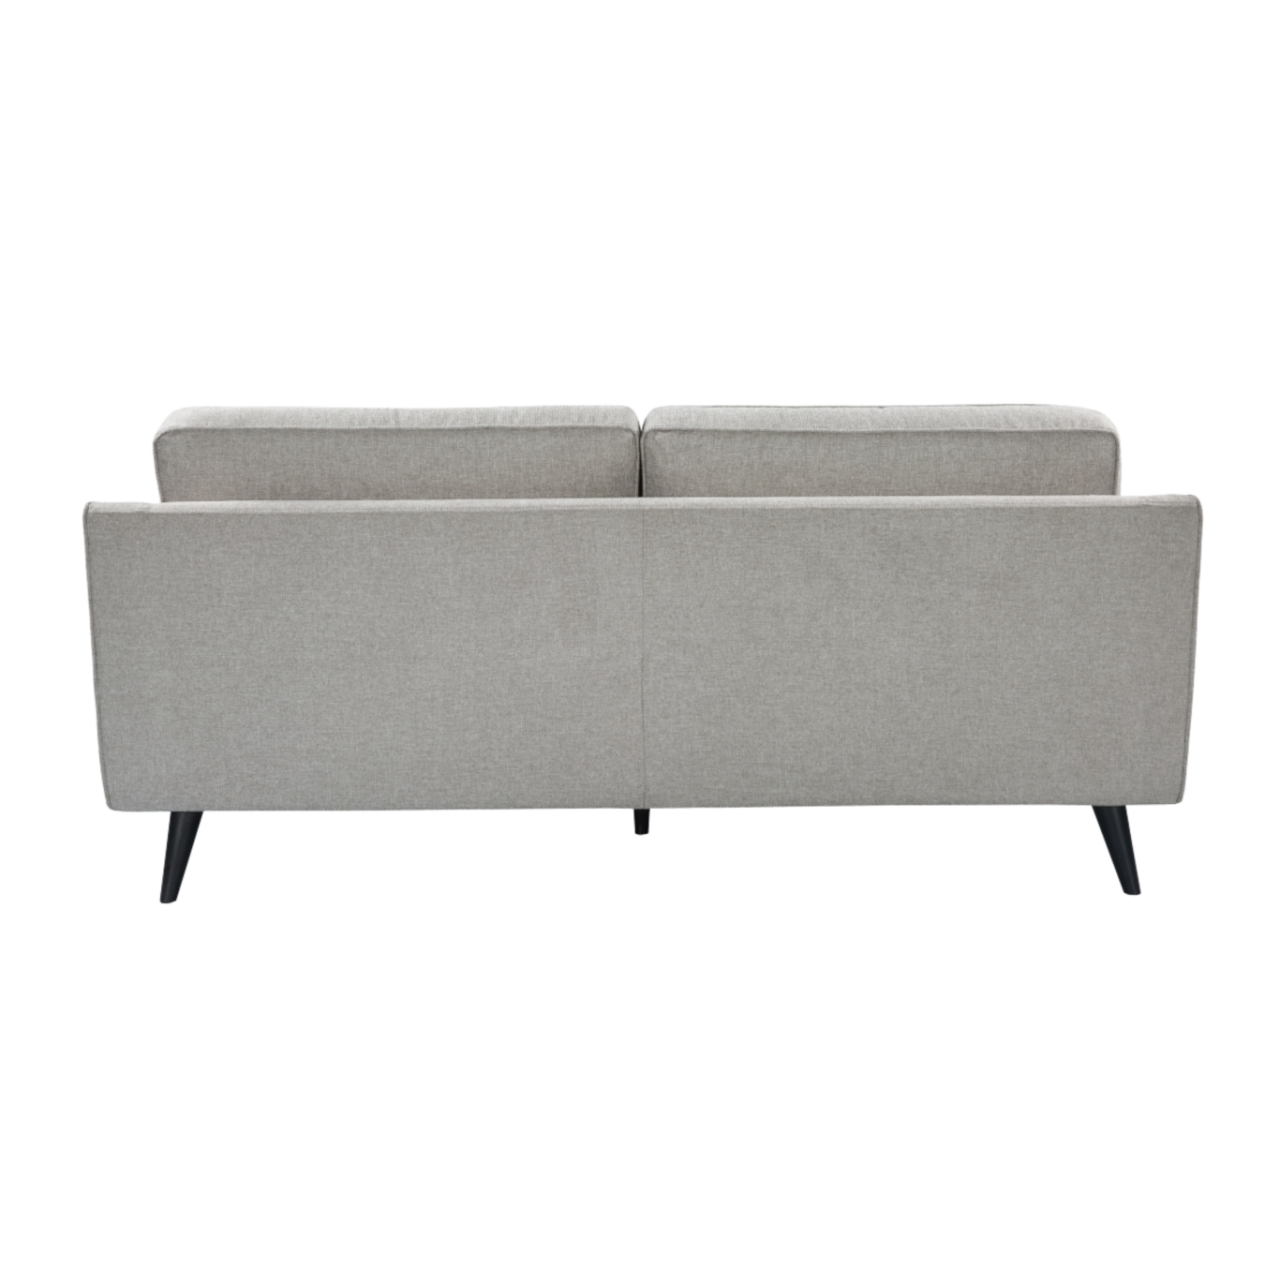 back view of simple, modern upholstered 2.5 seater sofa in stone linen